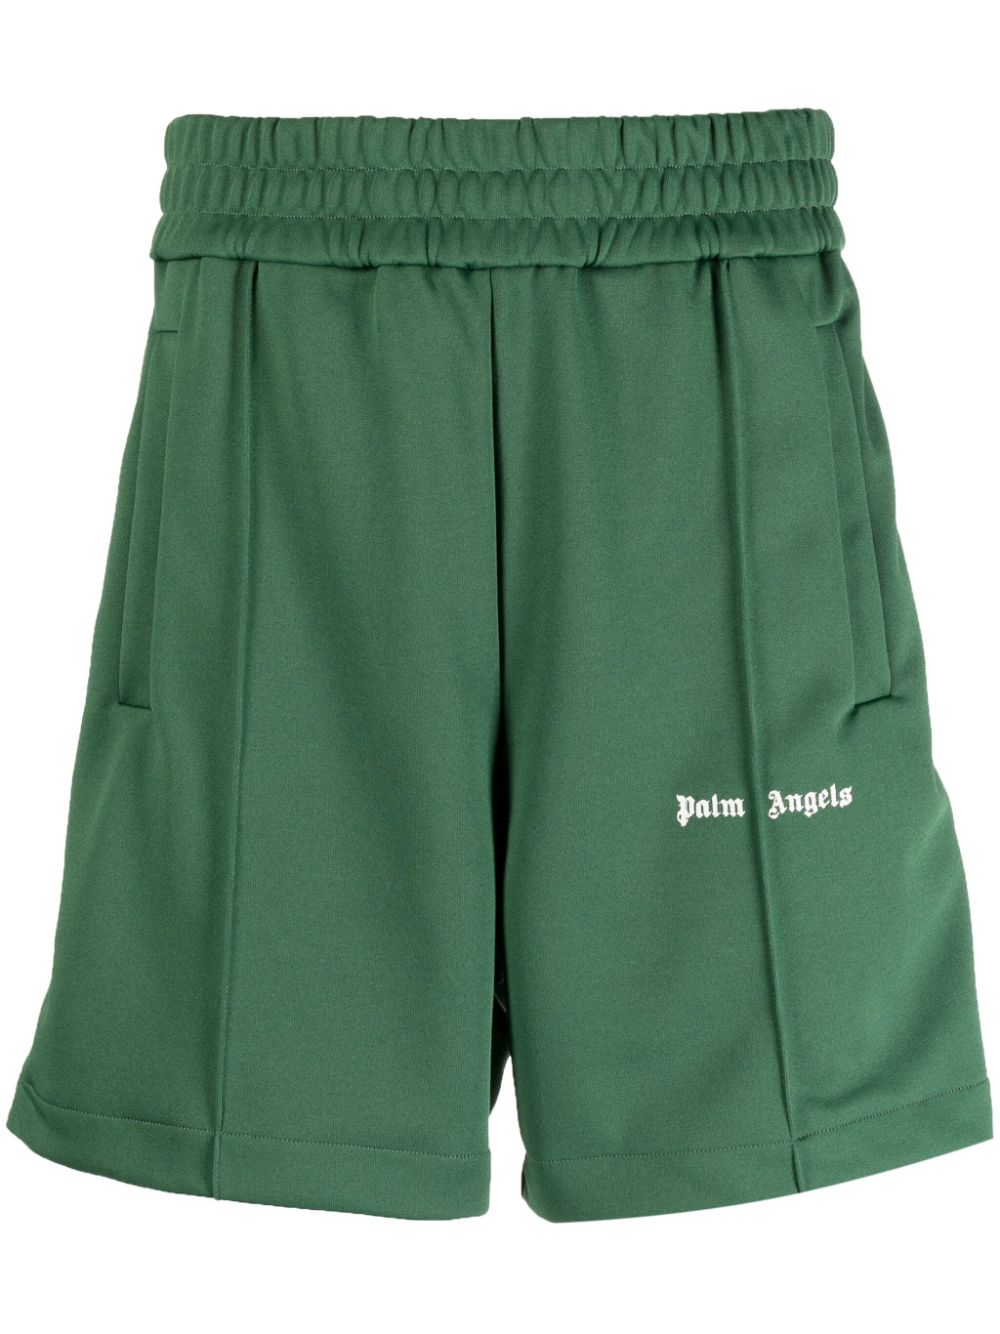 Palm Angels New Classic Embroidered Track Shorts - Farfetch